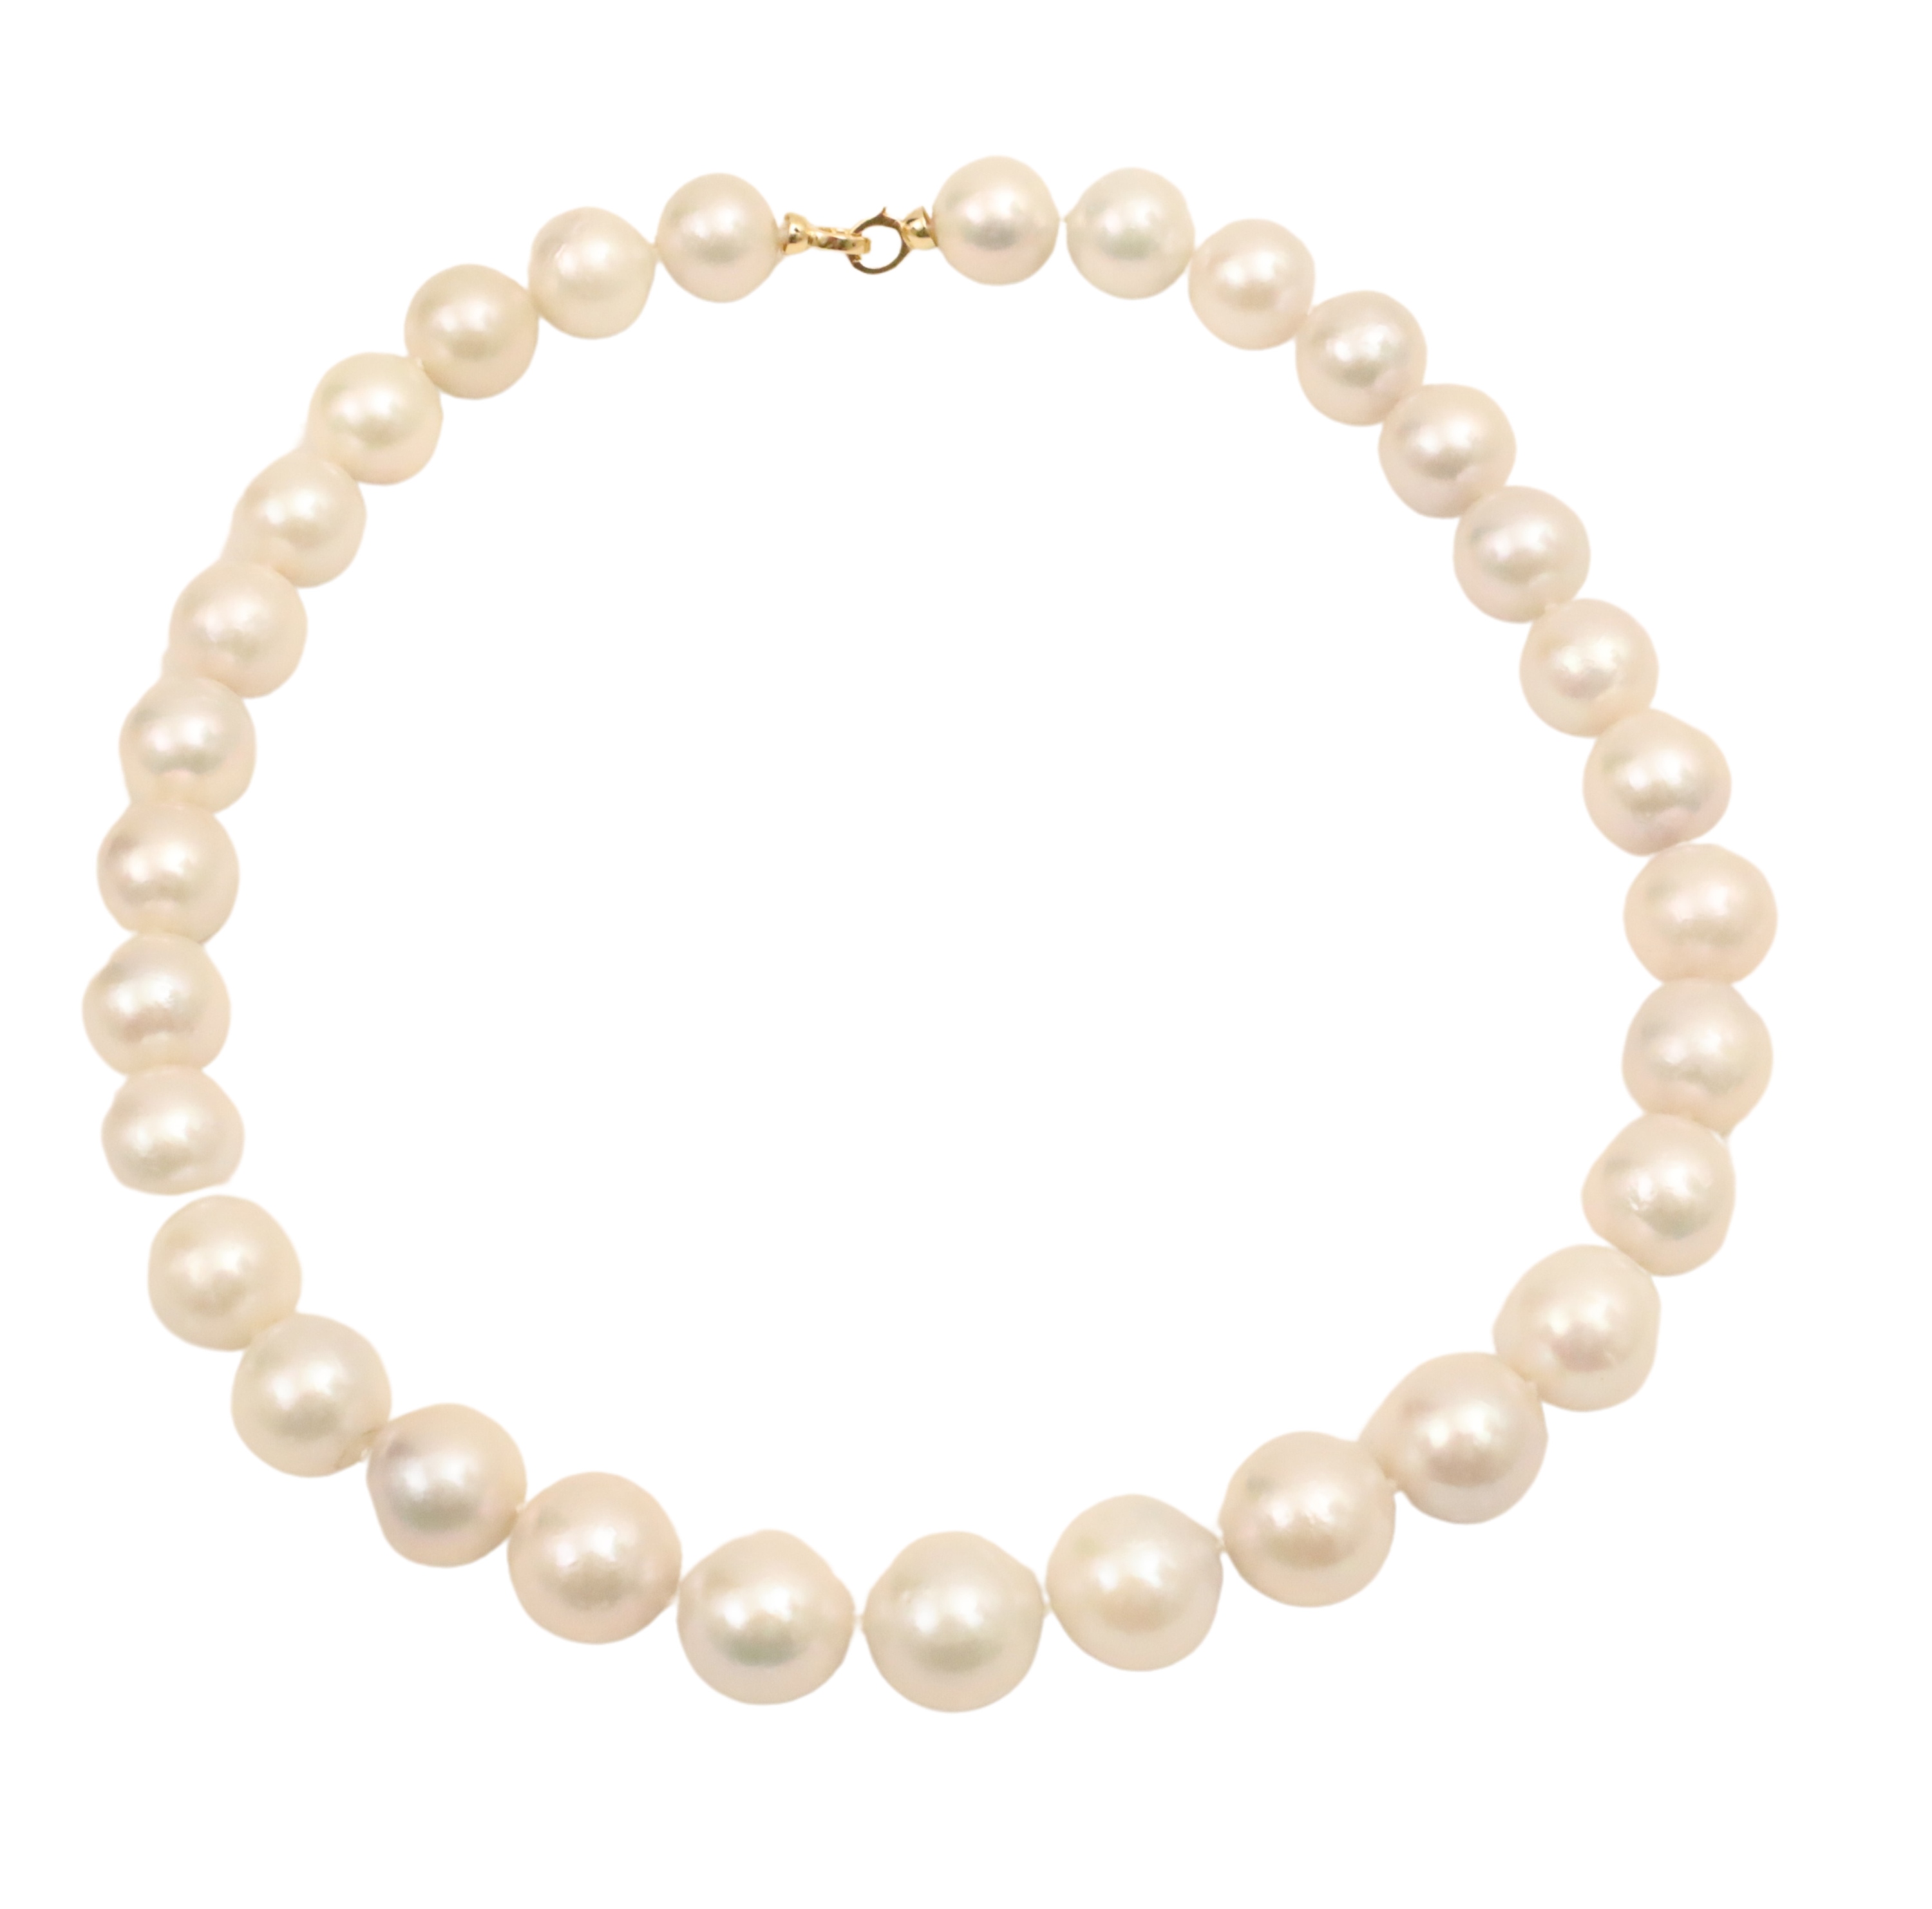 17 STRAND OF PEARLS NECKLACE 17  2f8d6a